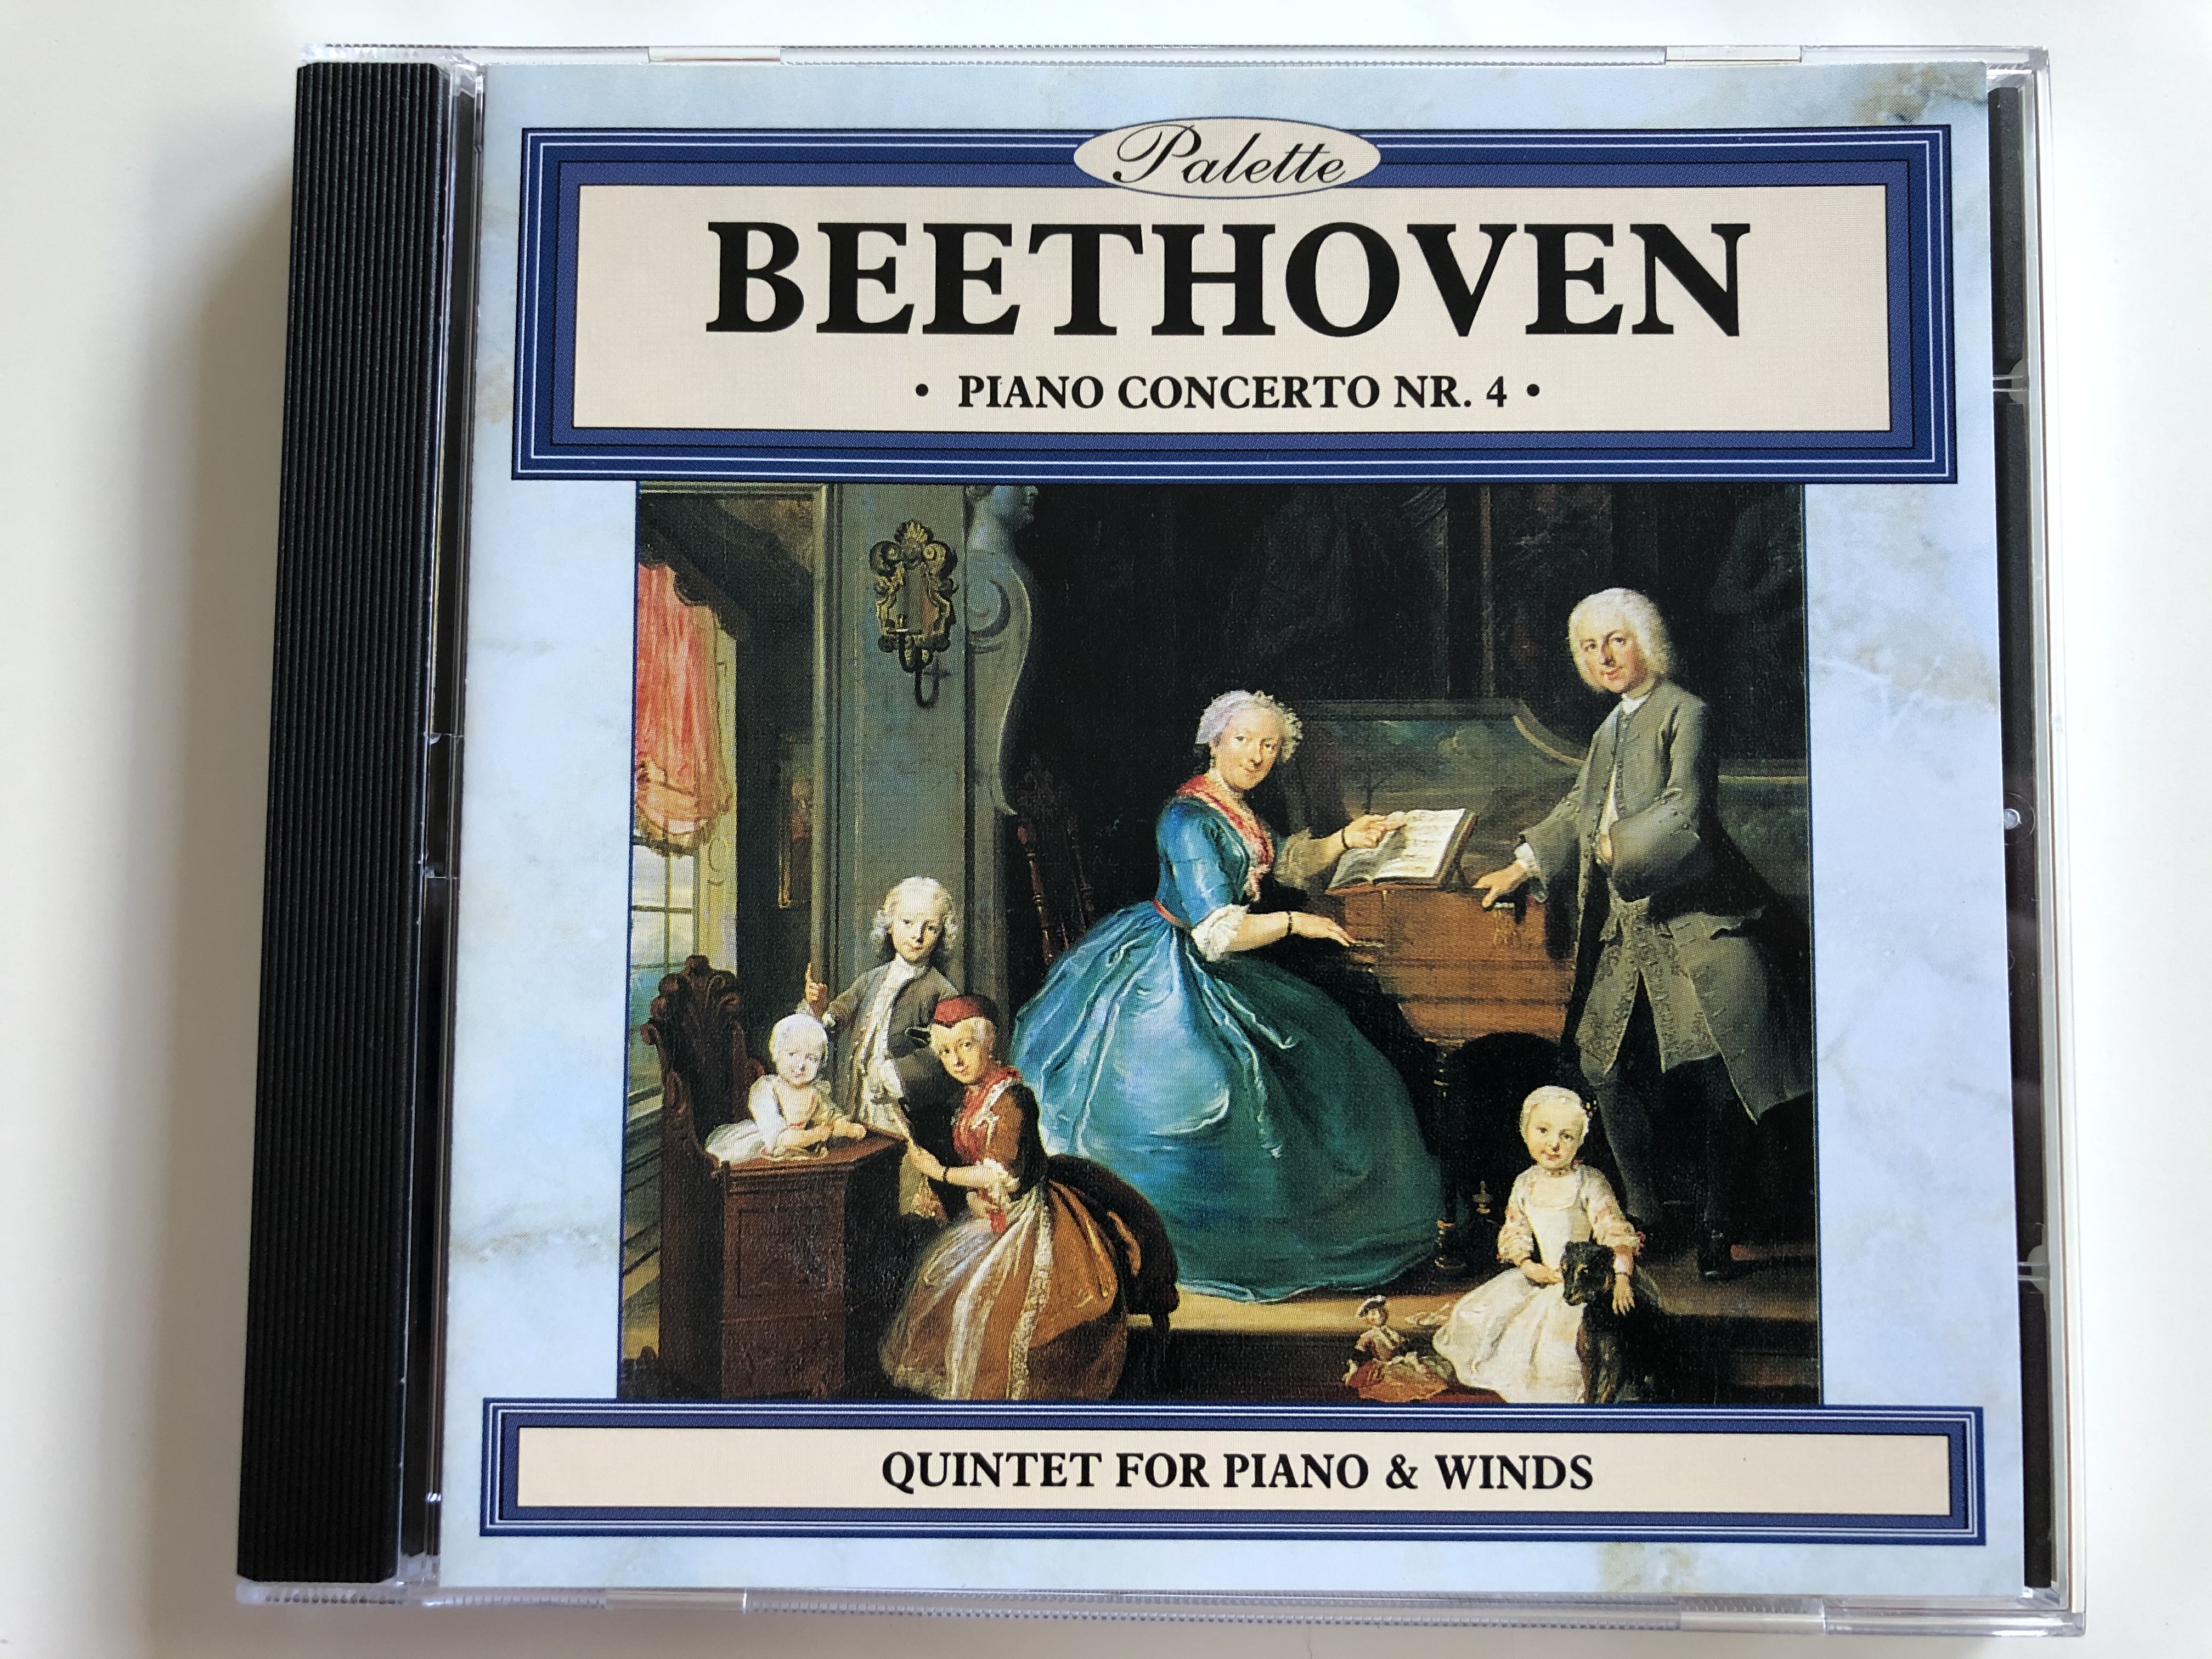 beethoven-piano-concerto-nr.-4-quintet-for-piano-winds-palette-audio-cd-1996-pal022-1-.jpg